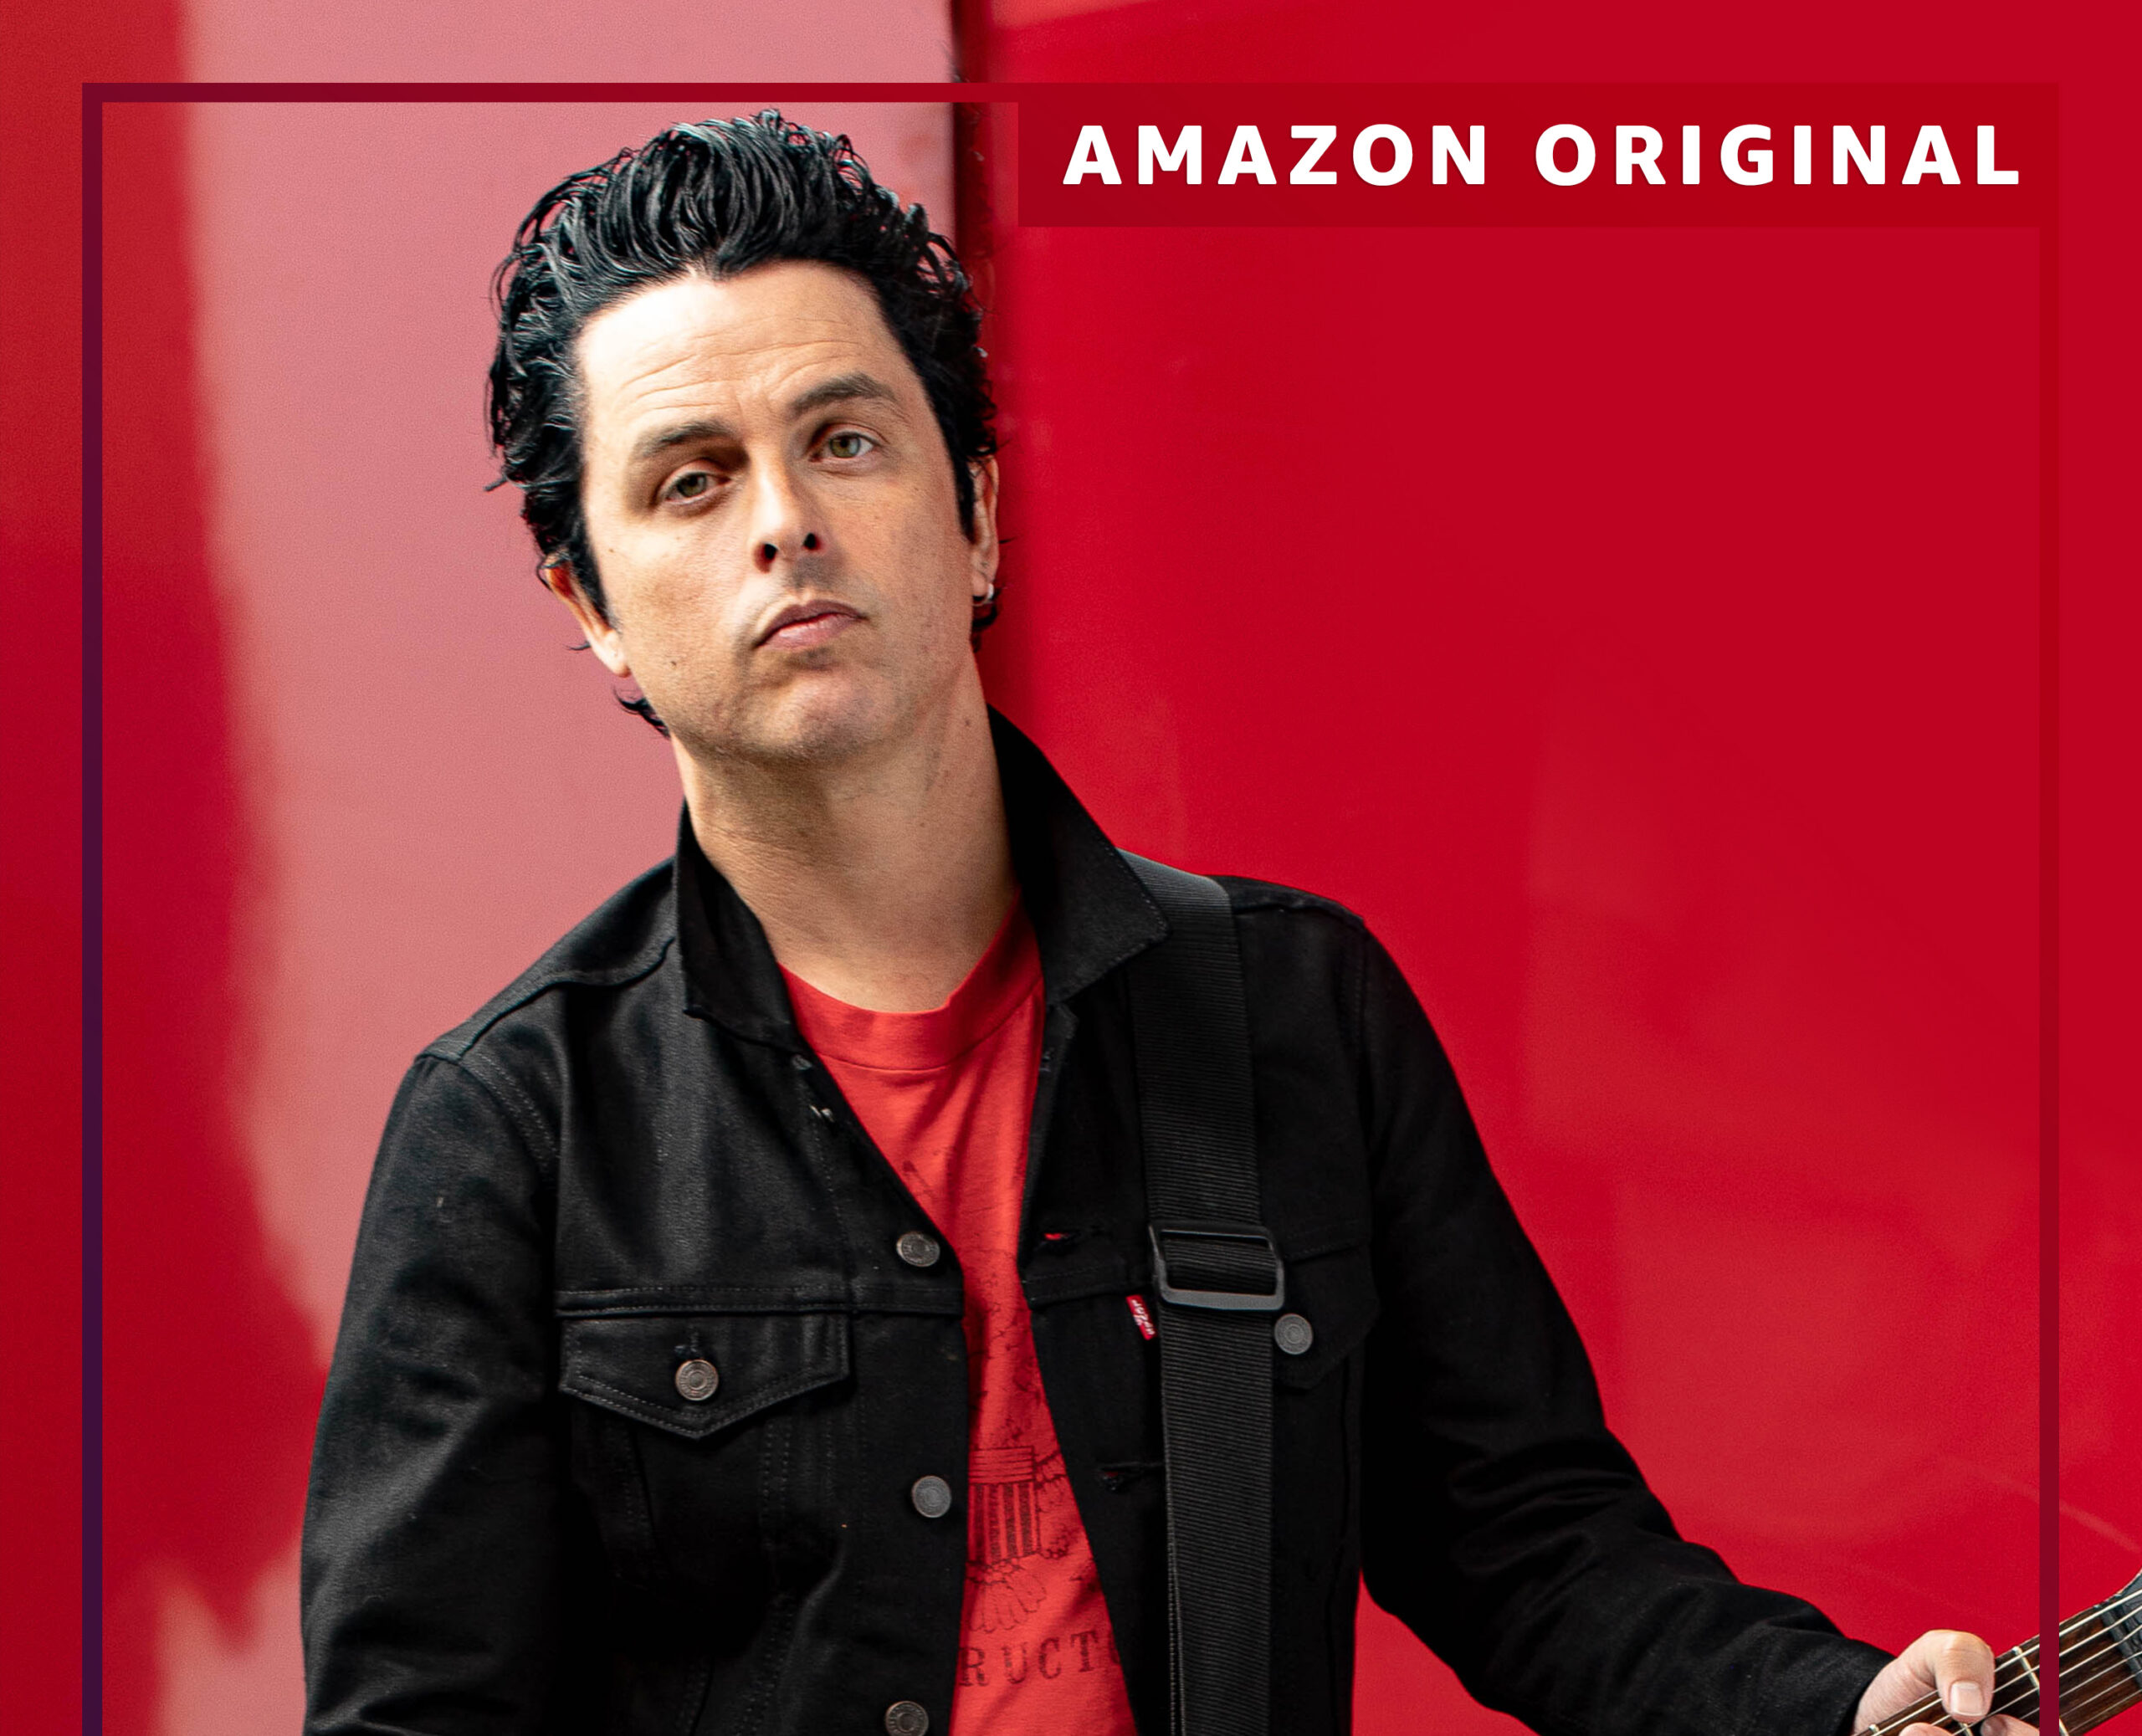 Green Day's BILLIE JOE ARMSTRONG Releases Amazon Original Cover of Wreckless Eric's "Whole Wide World" 